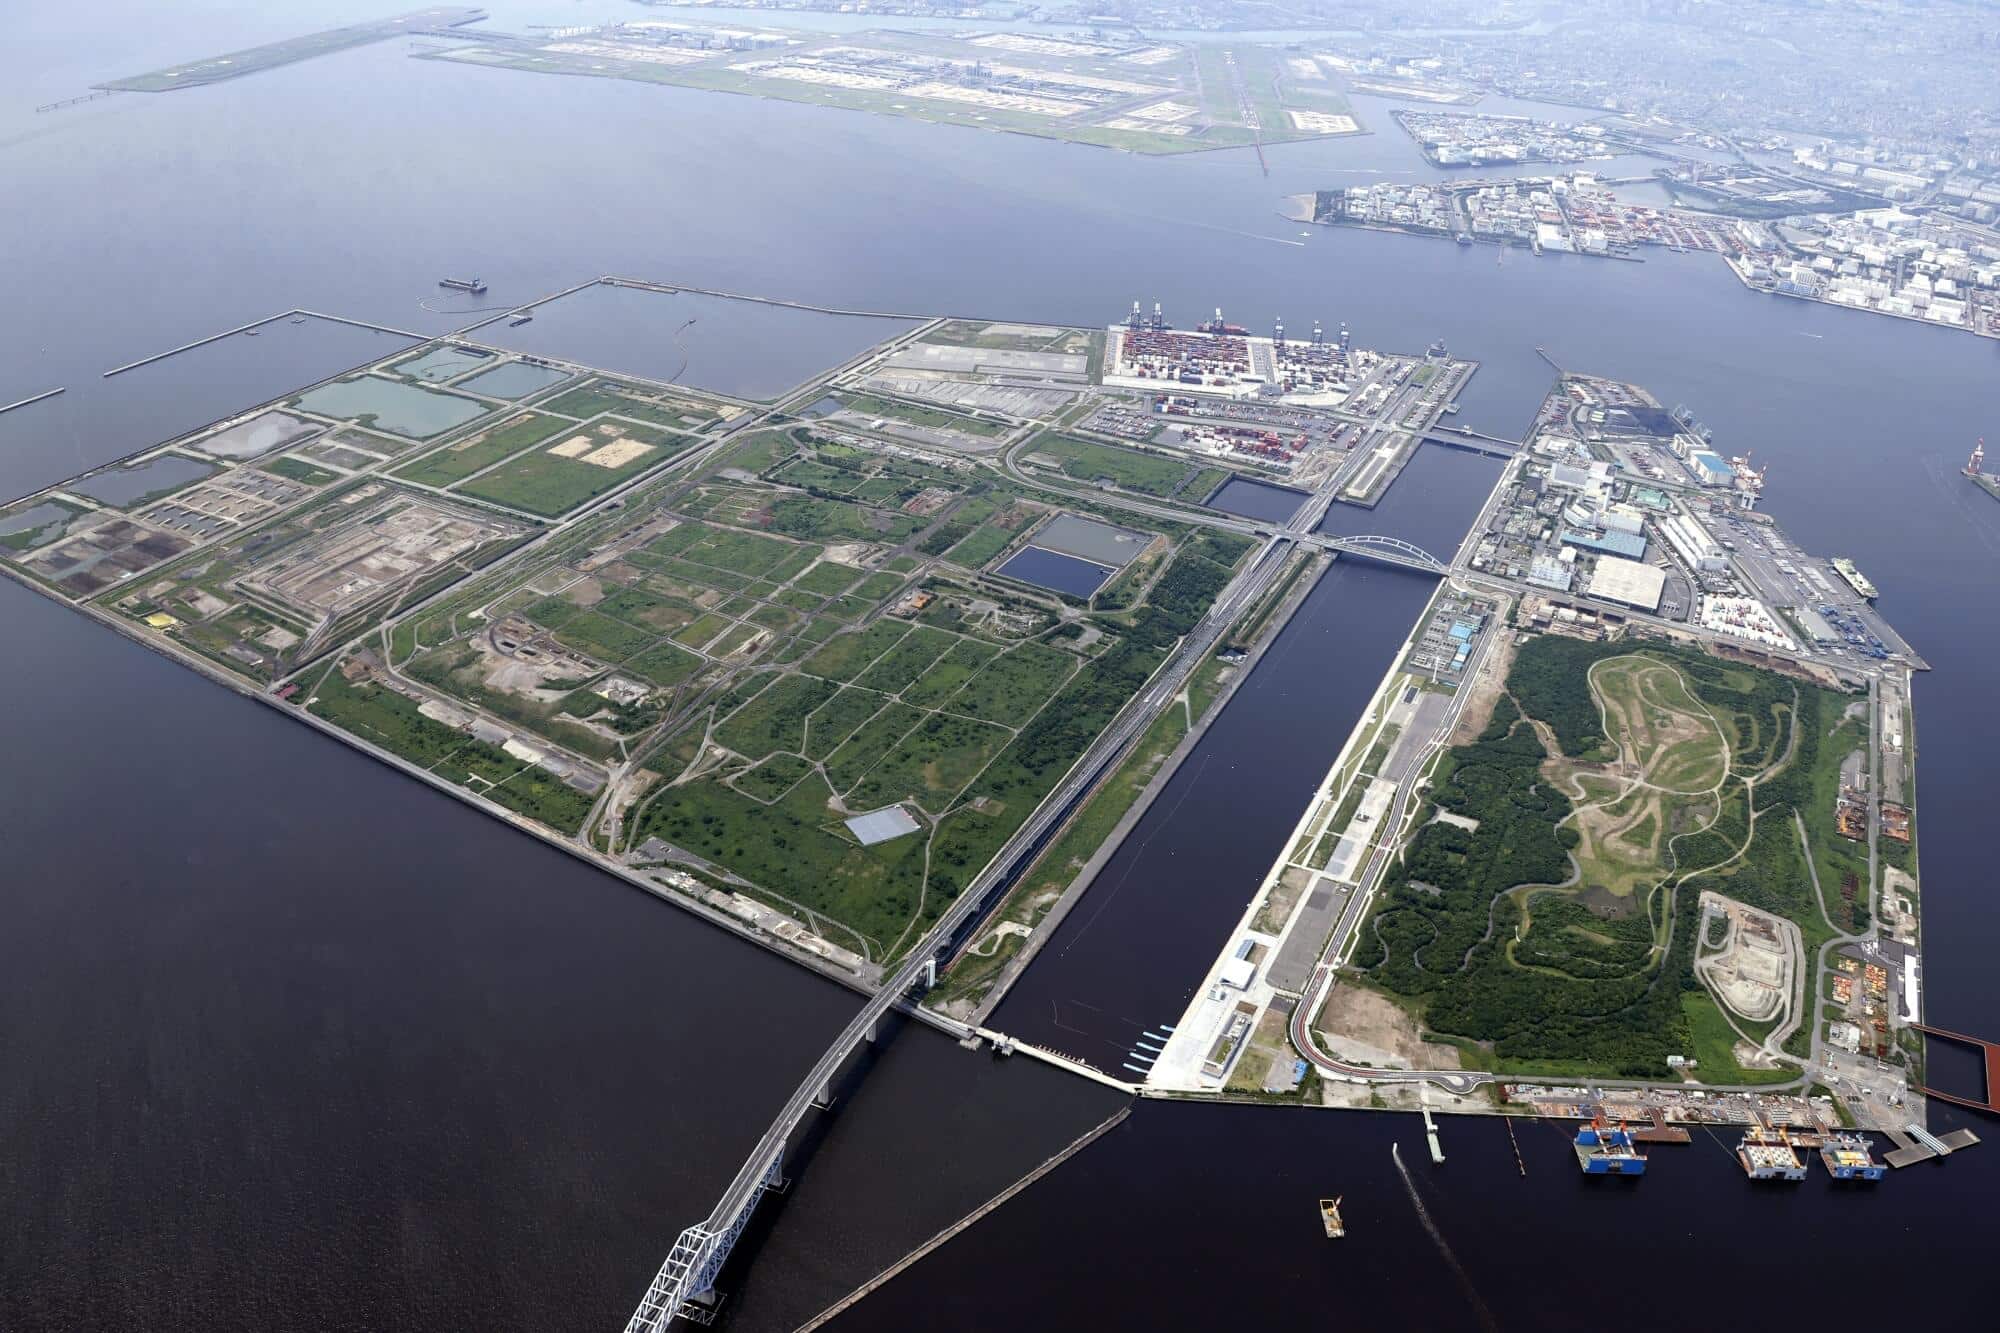 The neighborhood will be built on artificial land that has not been inhabited for several decades, and was mainly used for container storage and garbage processing of the local port. Photo: Tokyo Metropolitan Government